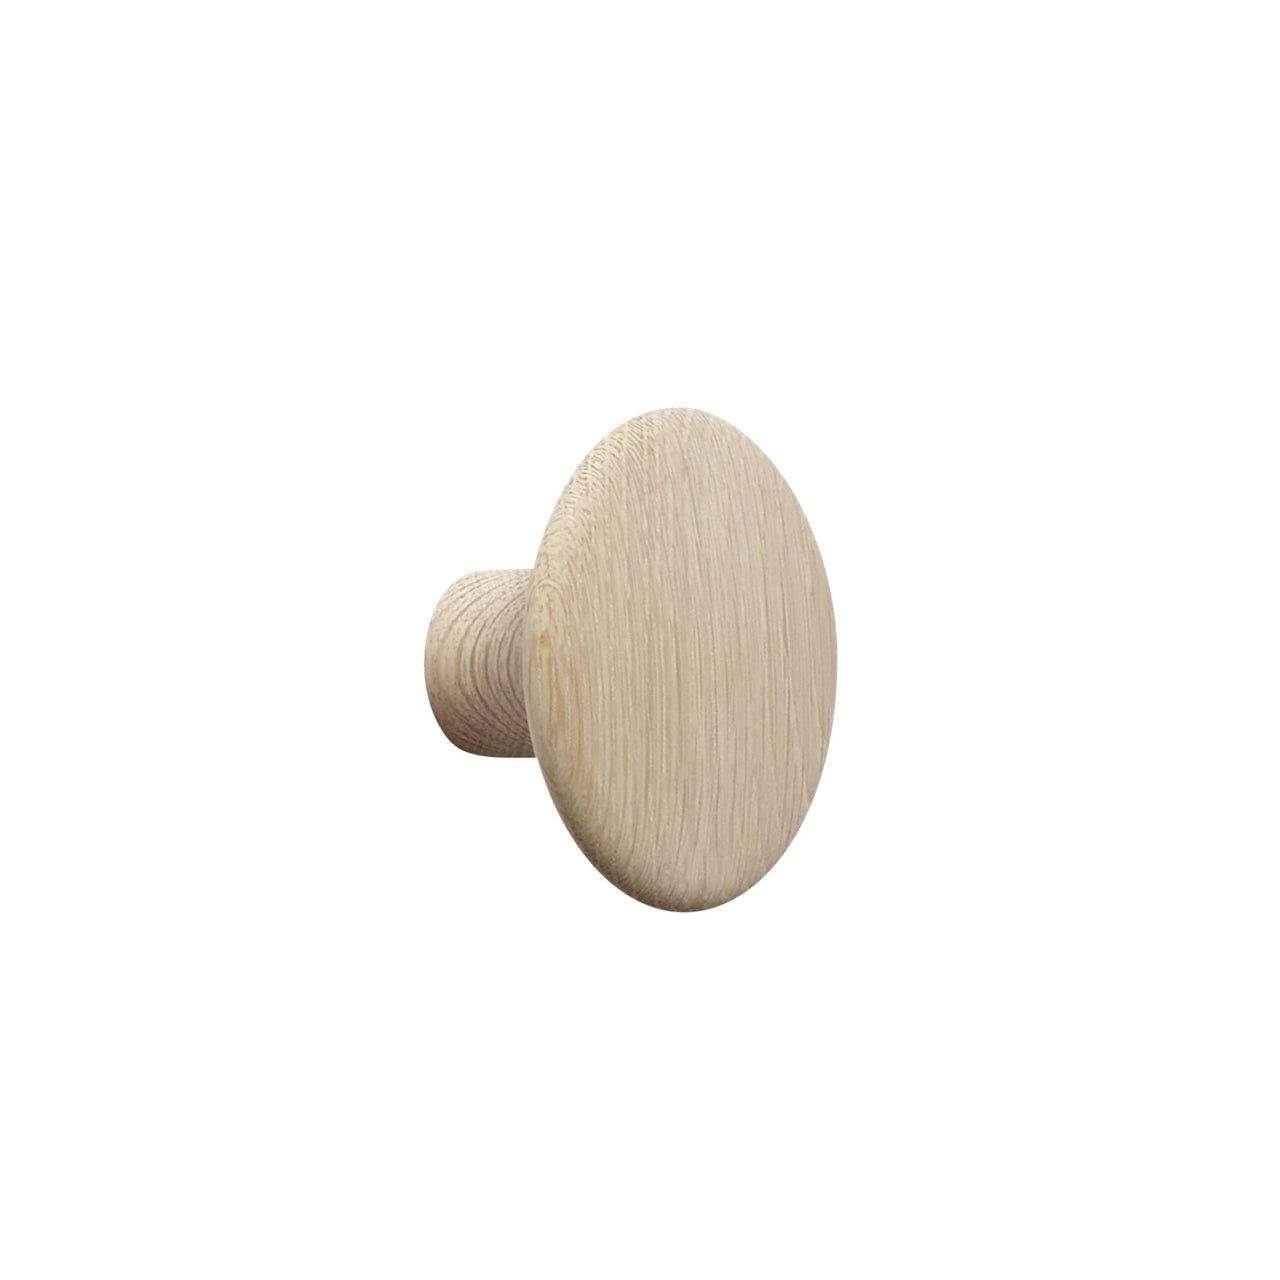 The Dots Wall Hooks: Small  - 3.5